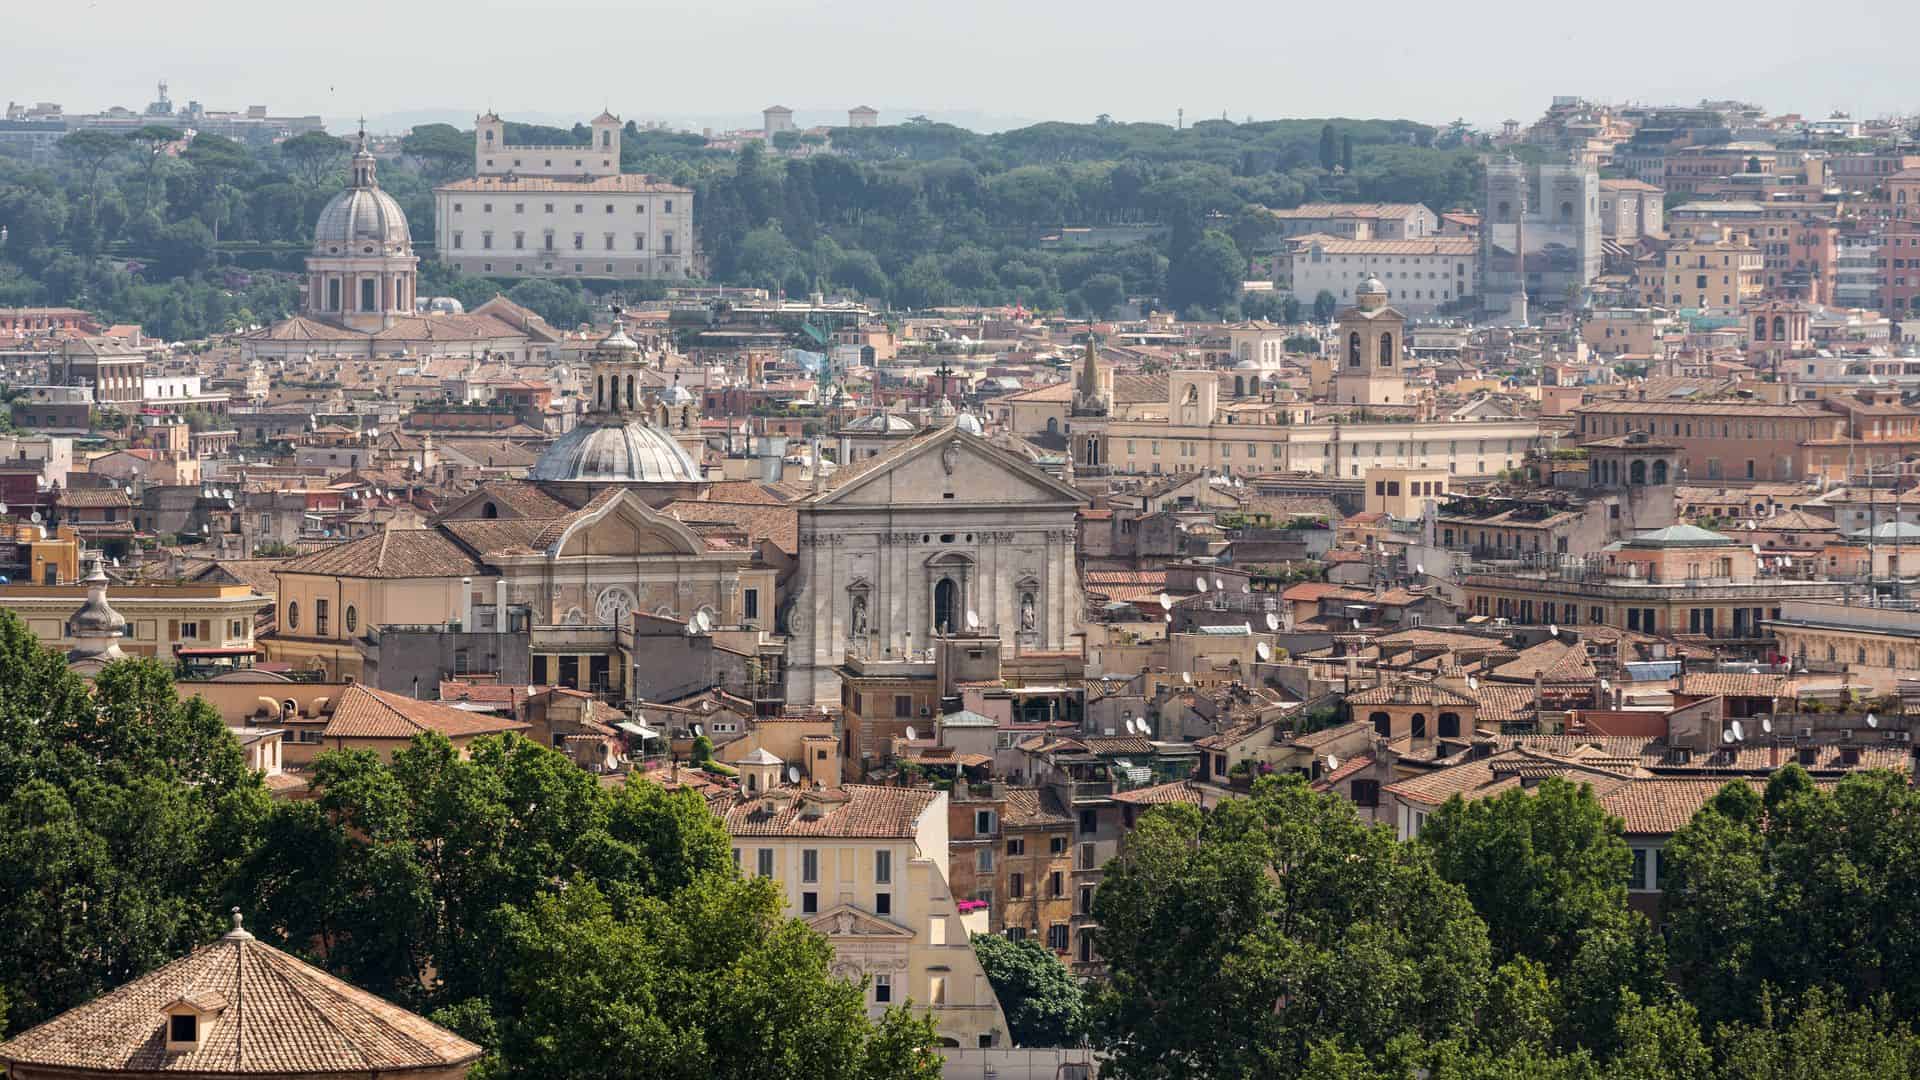 A view of Rome from Janiculum Hill.